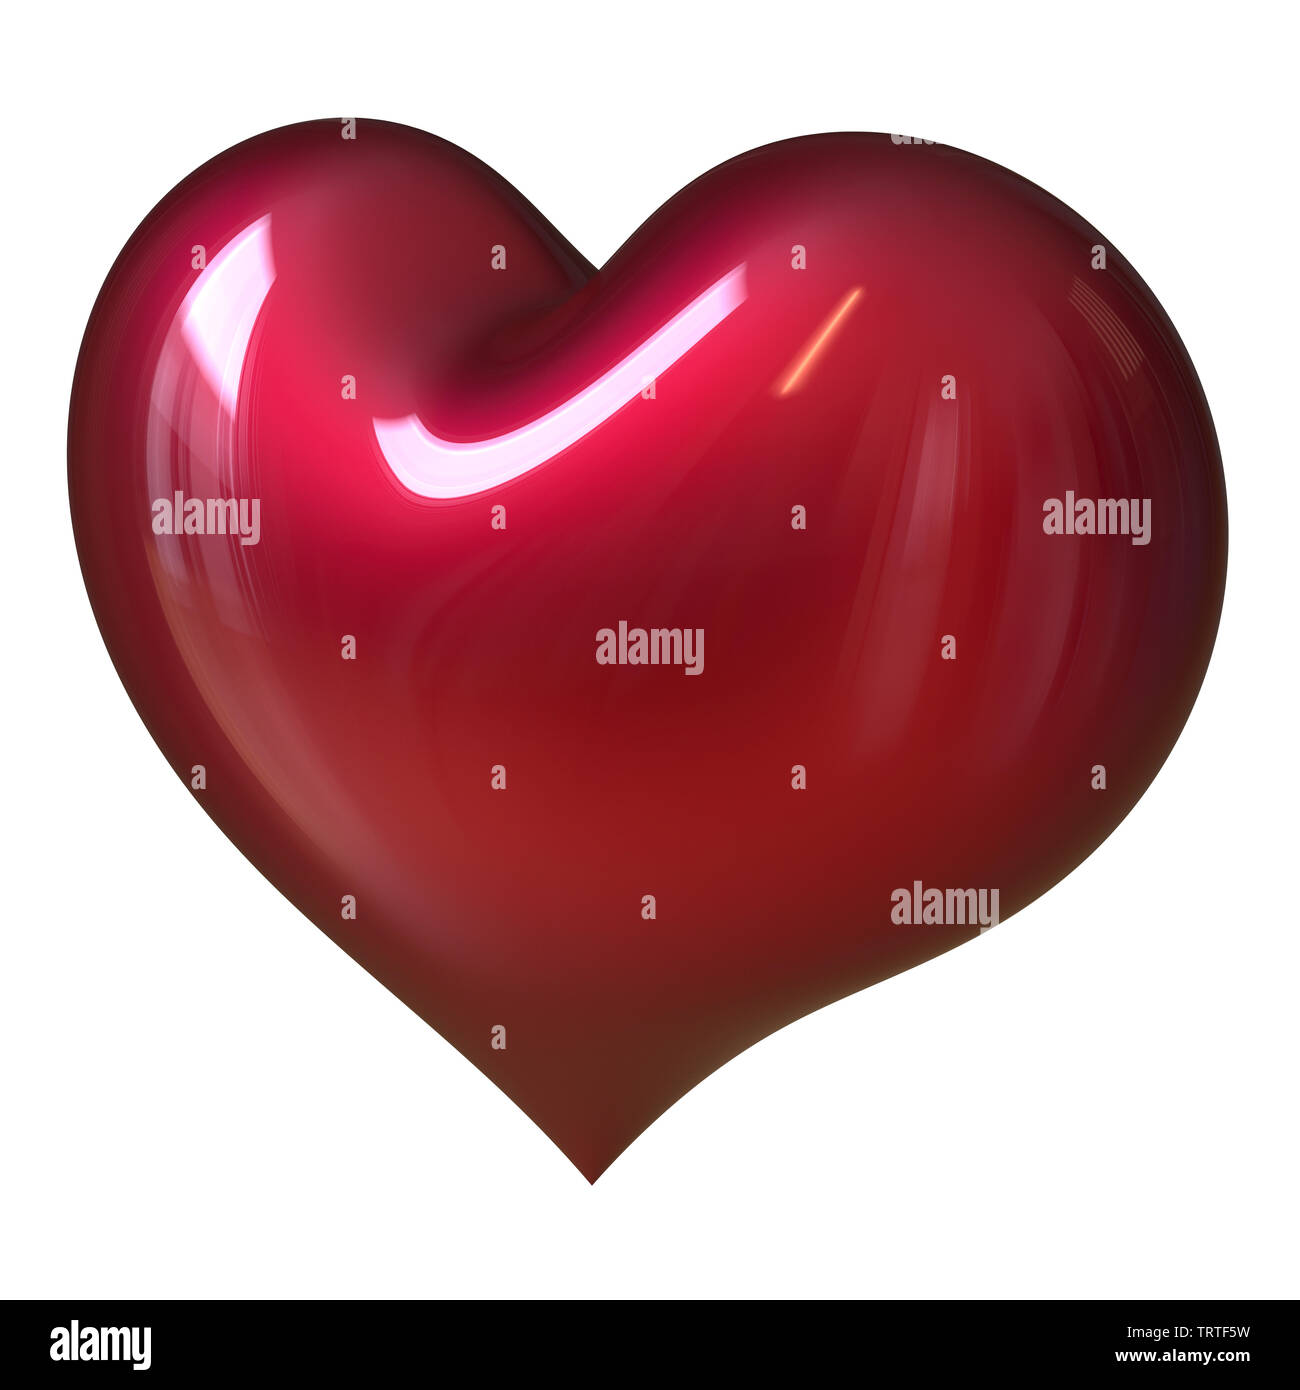 Heart shape Love symbol red glossy. Valentine greeting card design element.  Healthcare heartbeat icon concept. 3d illustration isolated Stock Photo -  Alamy